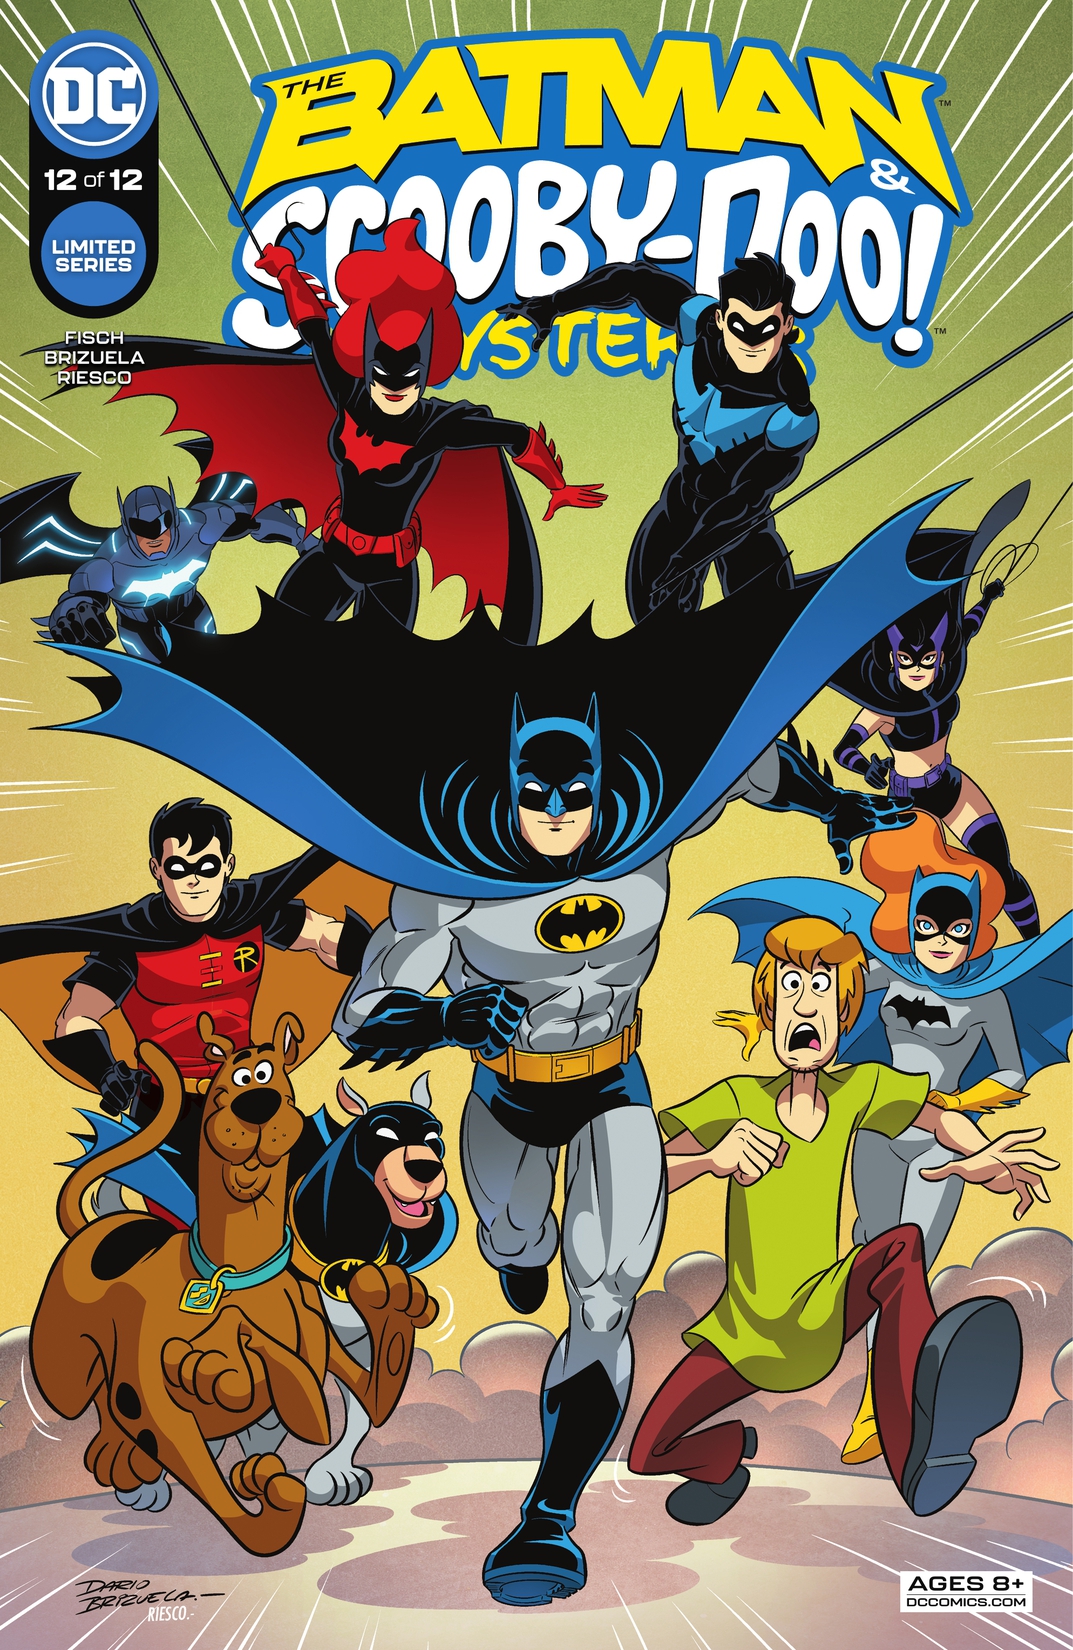 The Batman & Scooby-Doo Mysteries #12 preview images